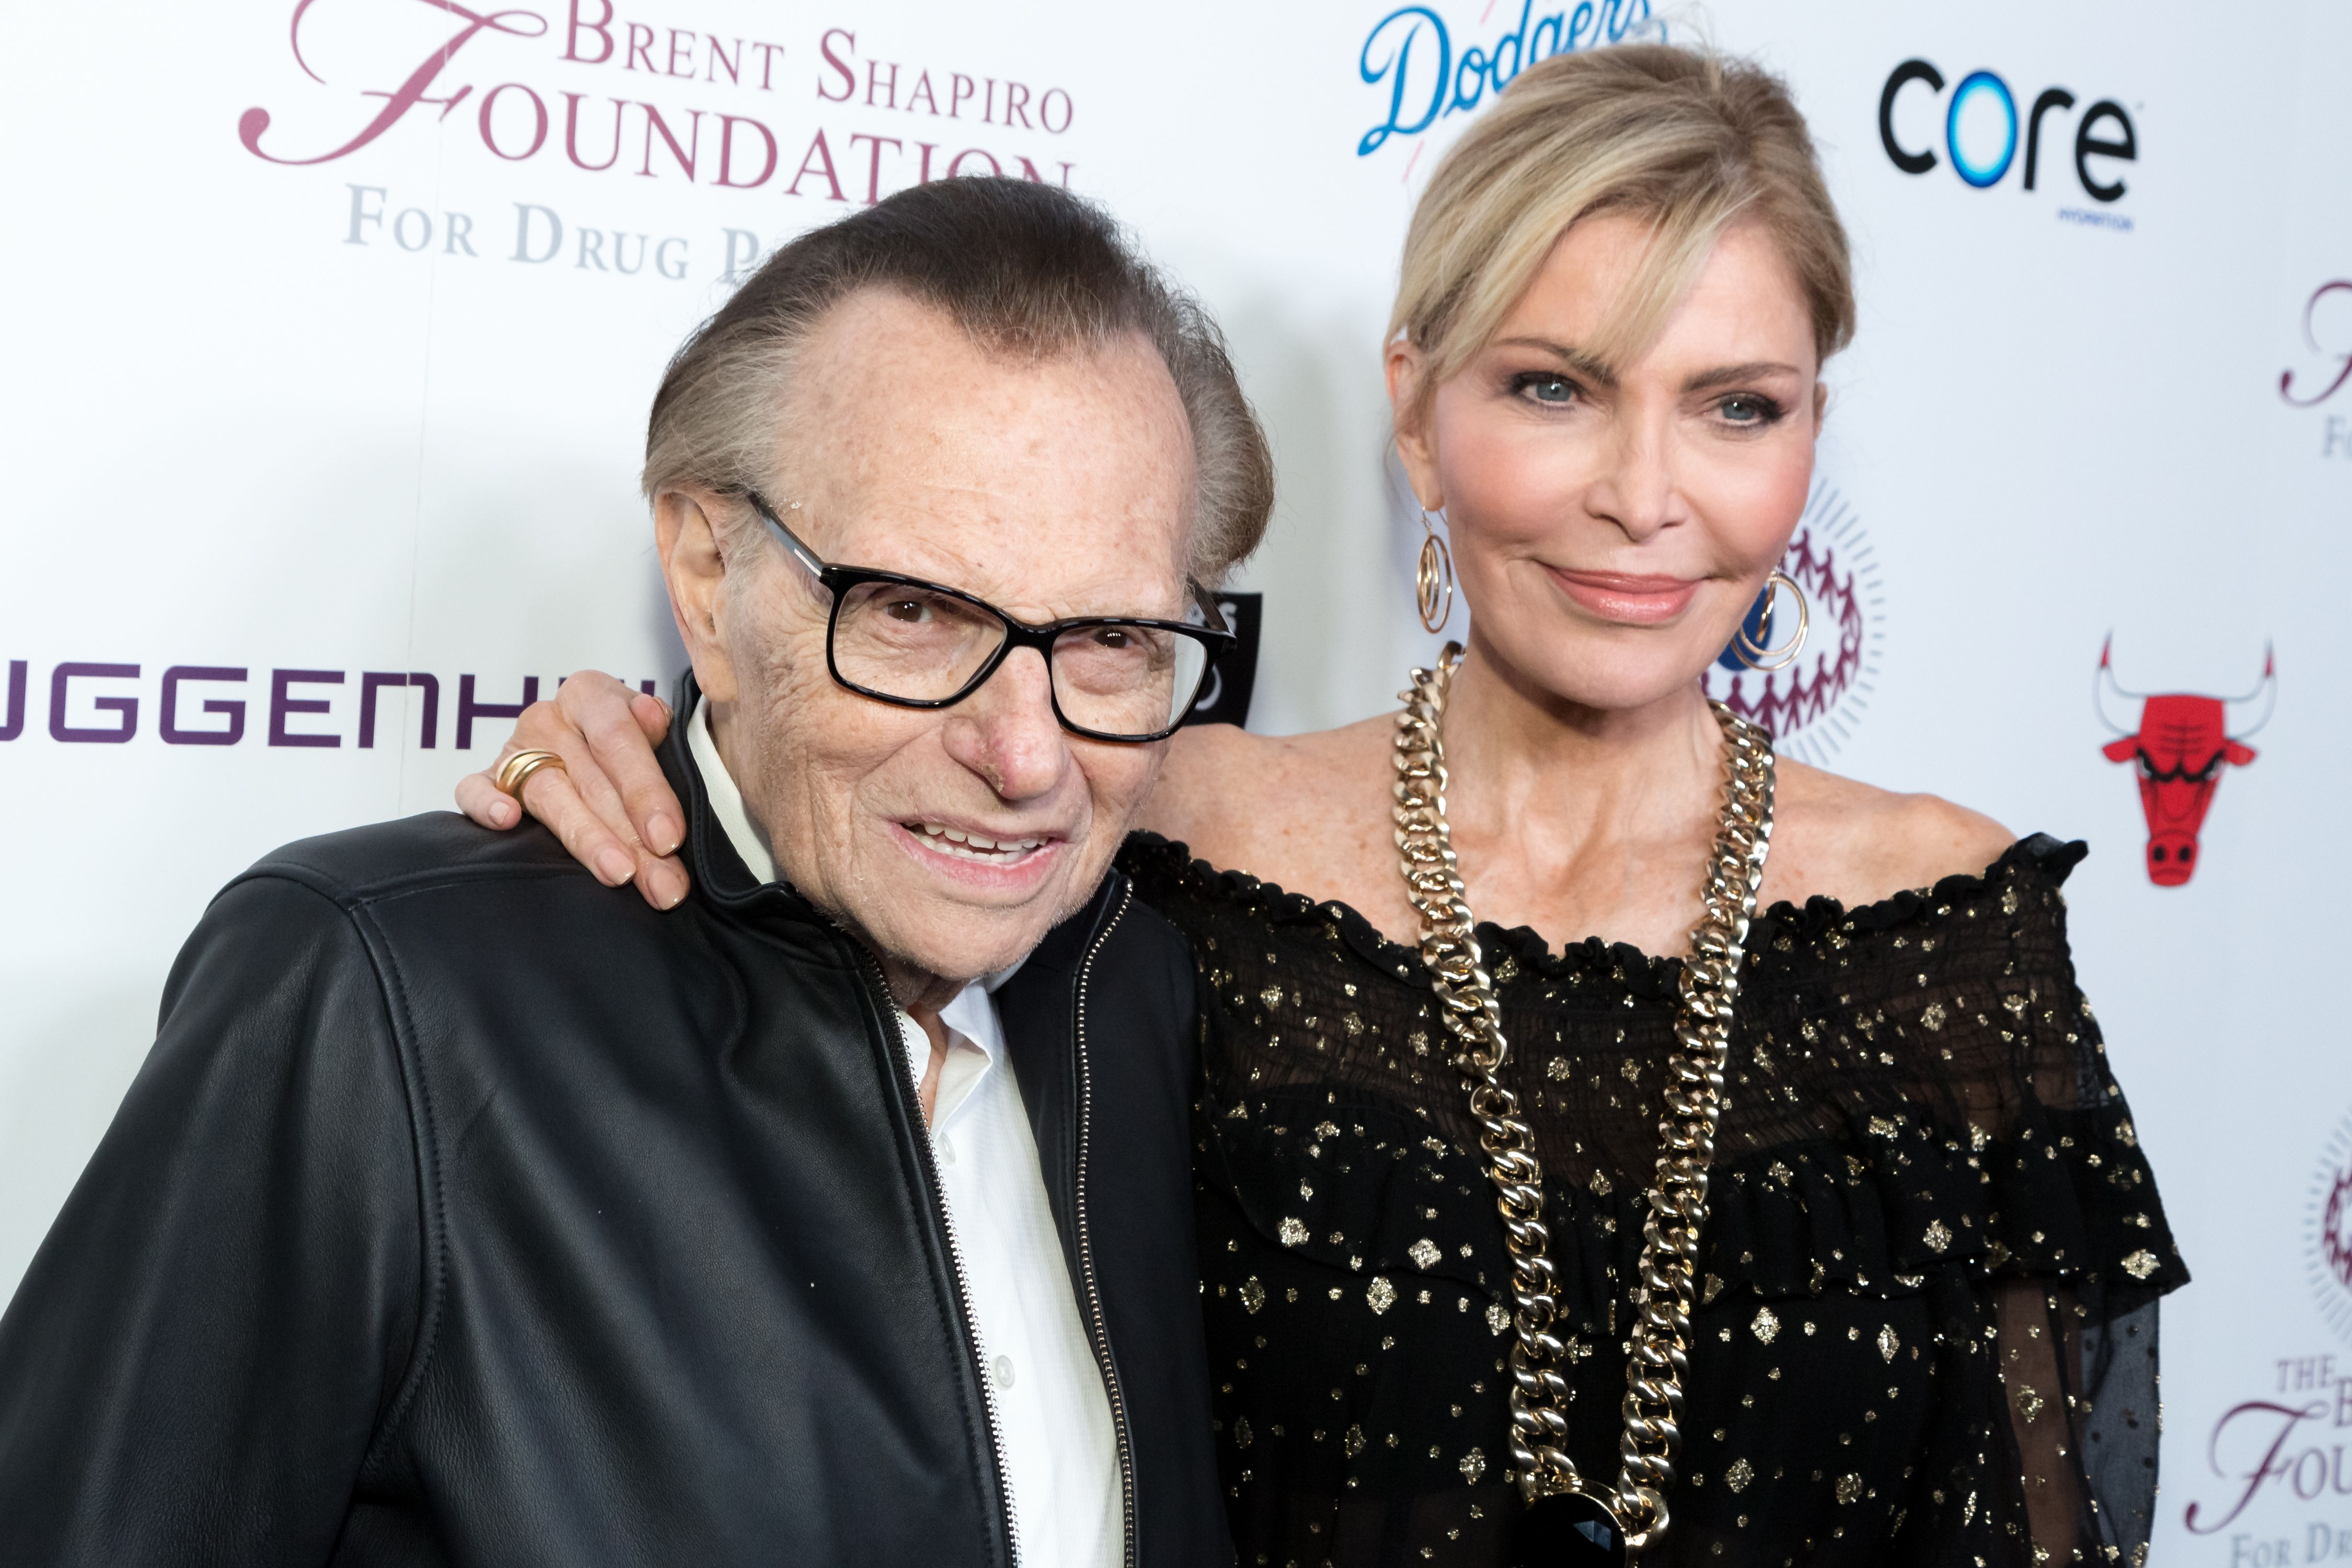 BEVERLY HILLS, CALIFORNIA - SEPTEMBER 07: Larry King and Shawn King attend The Brent Shapiro Foundation Summer Spectacular on September 7, 2018 in Beverly Hills, California. (Photo by Greg Doherty/FilmMagic)